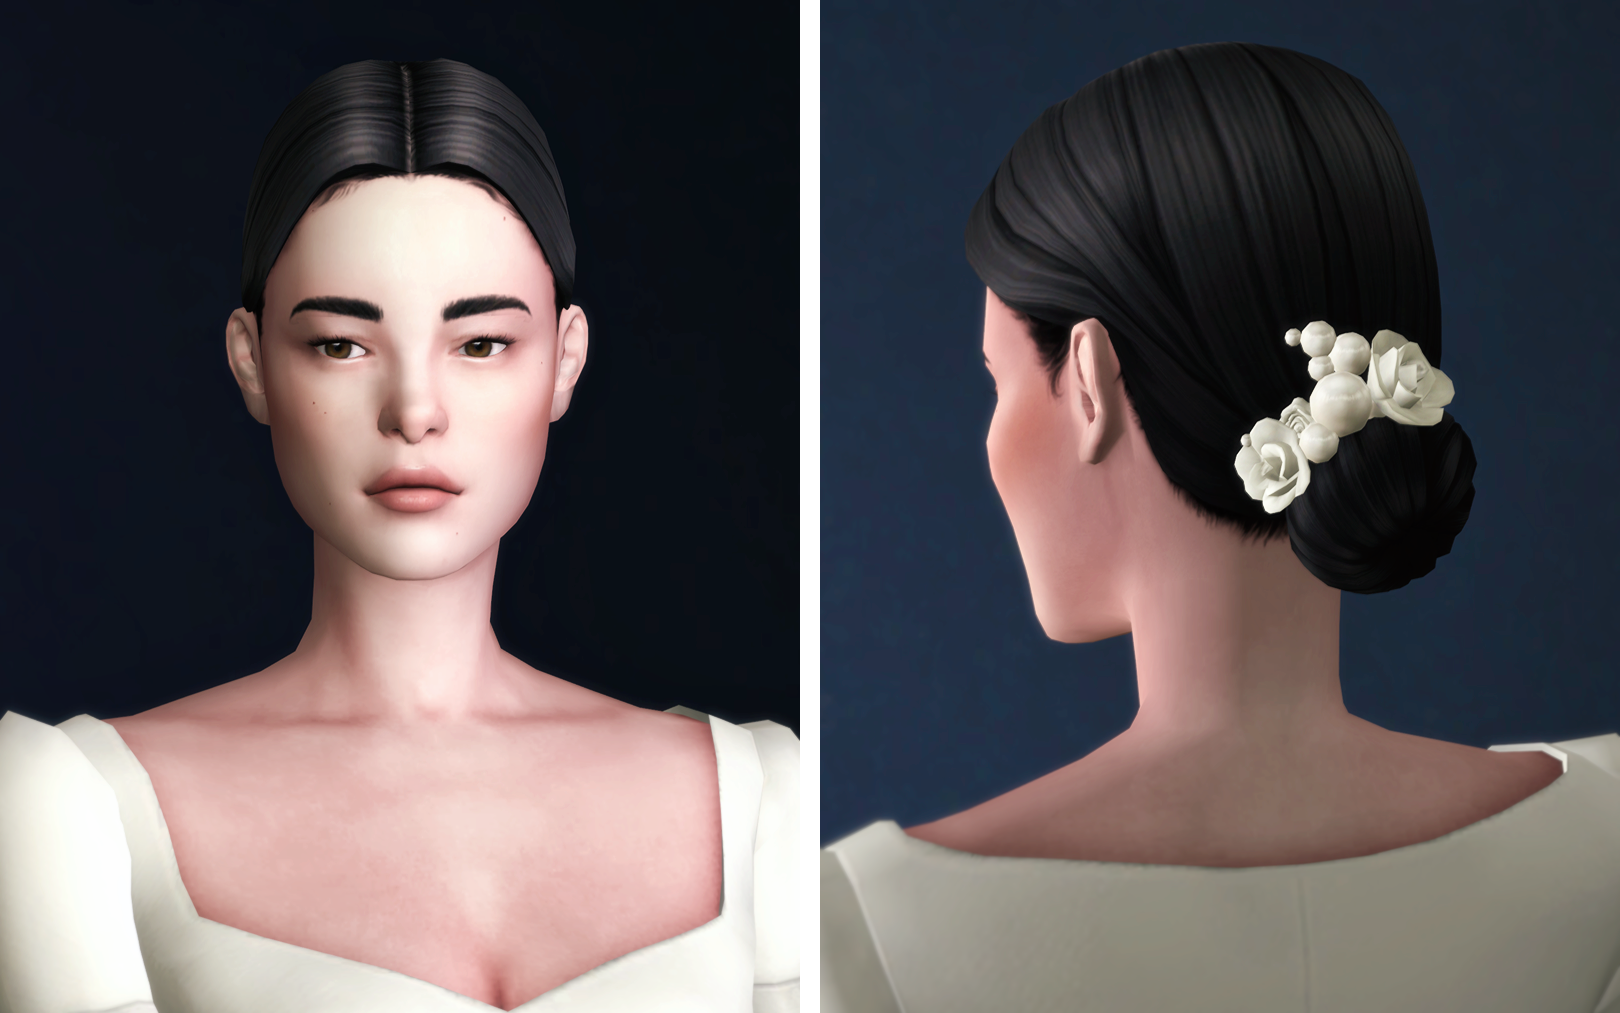 The Nana's Collection Part I - The Sims 4 Build / Buy - CurseForge